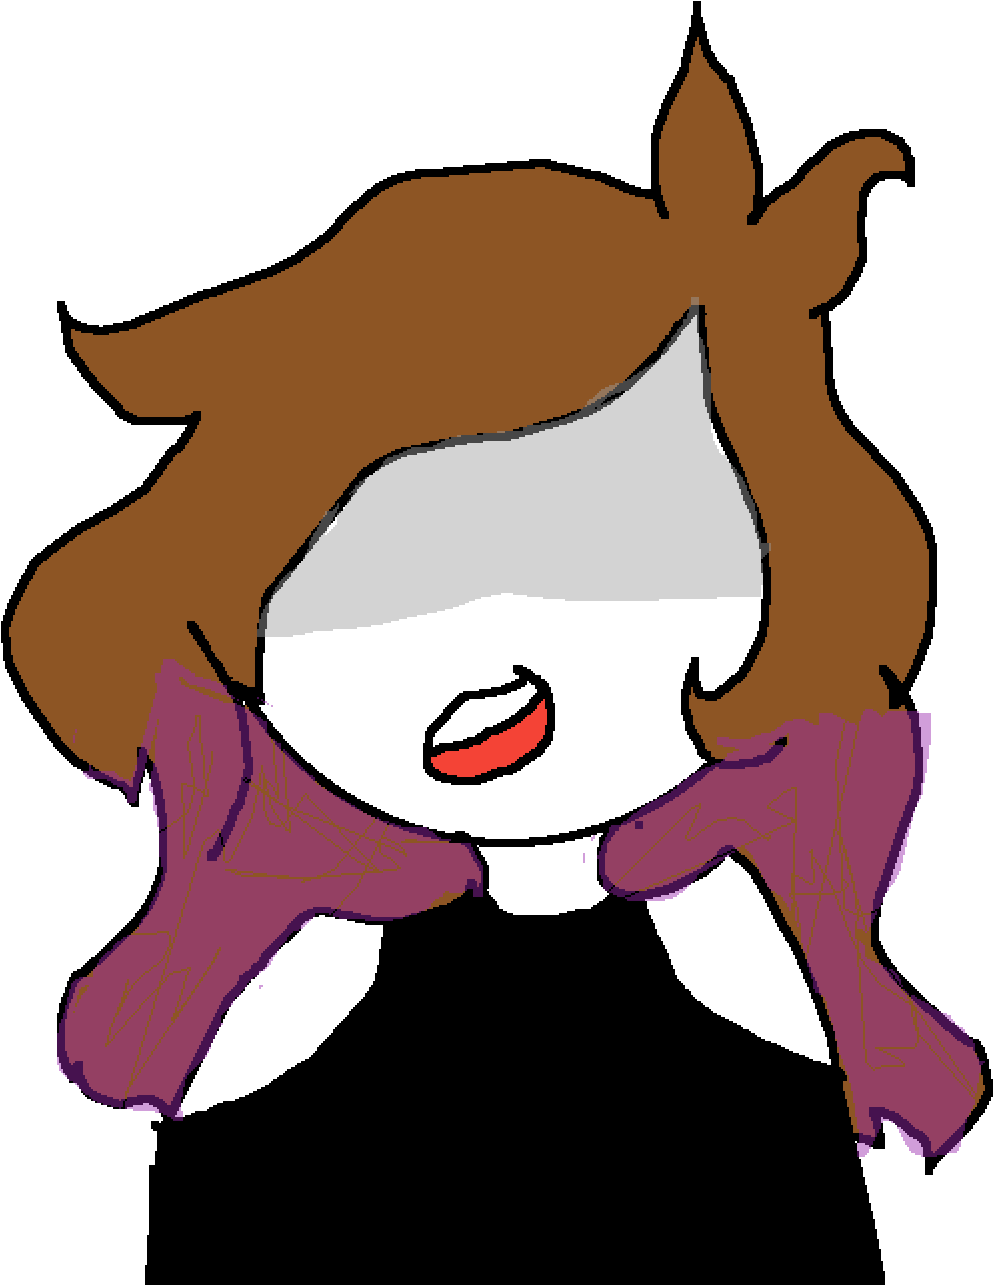 A Cartoon Of A Woman With Long Hair And Purple Boots